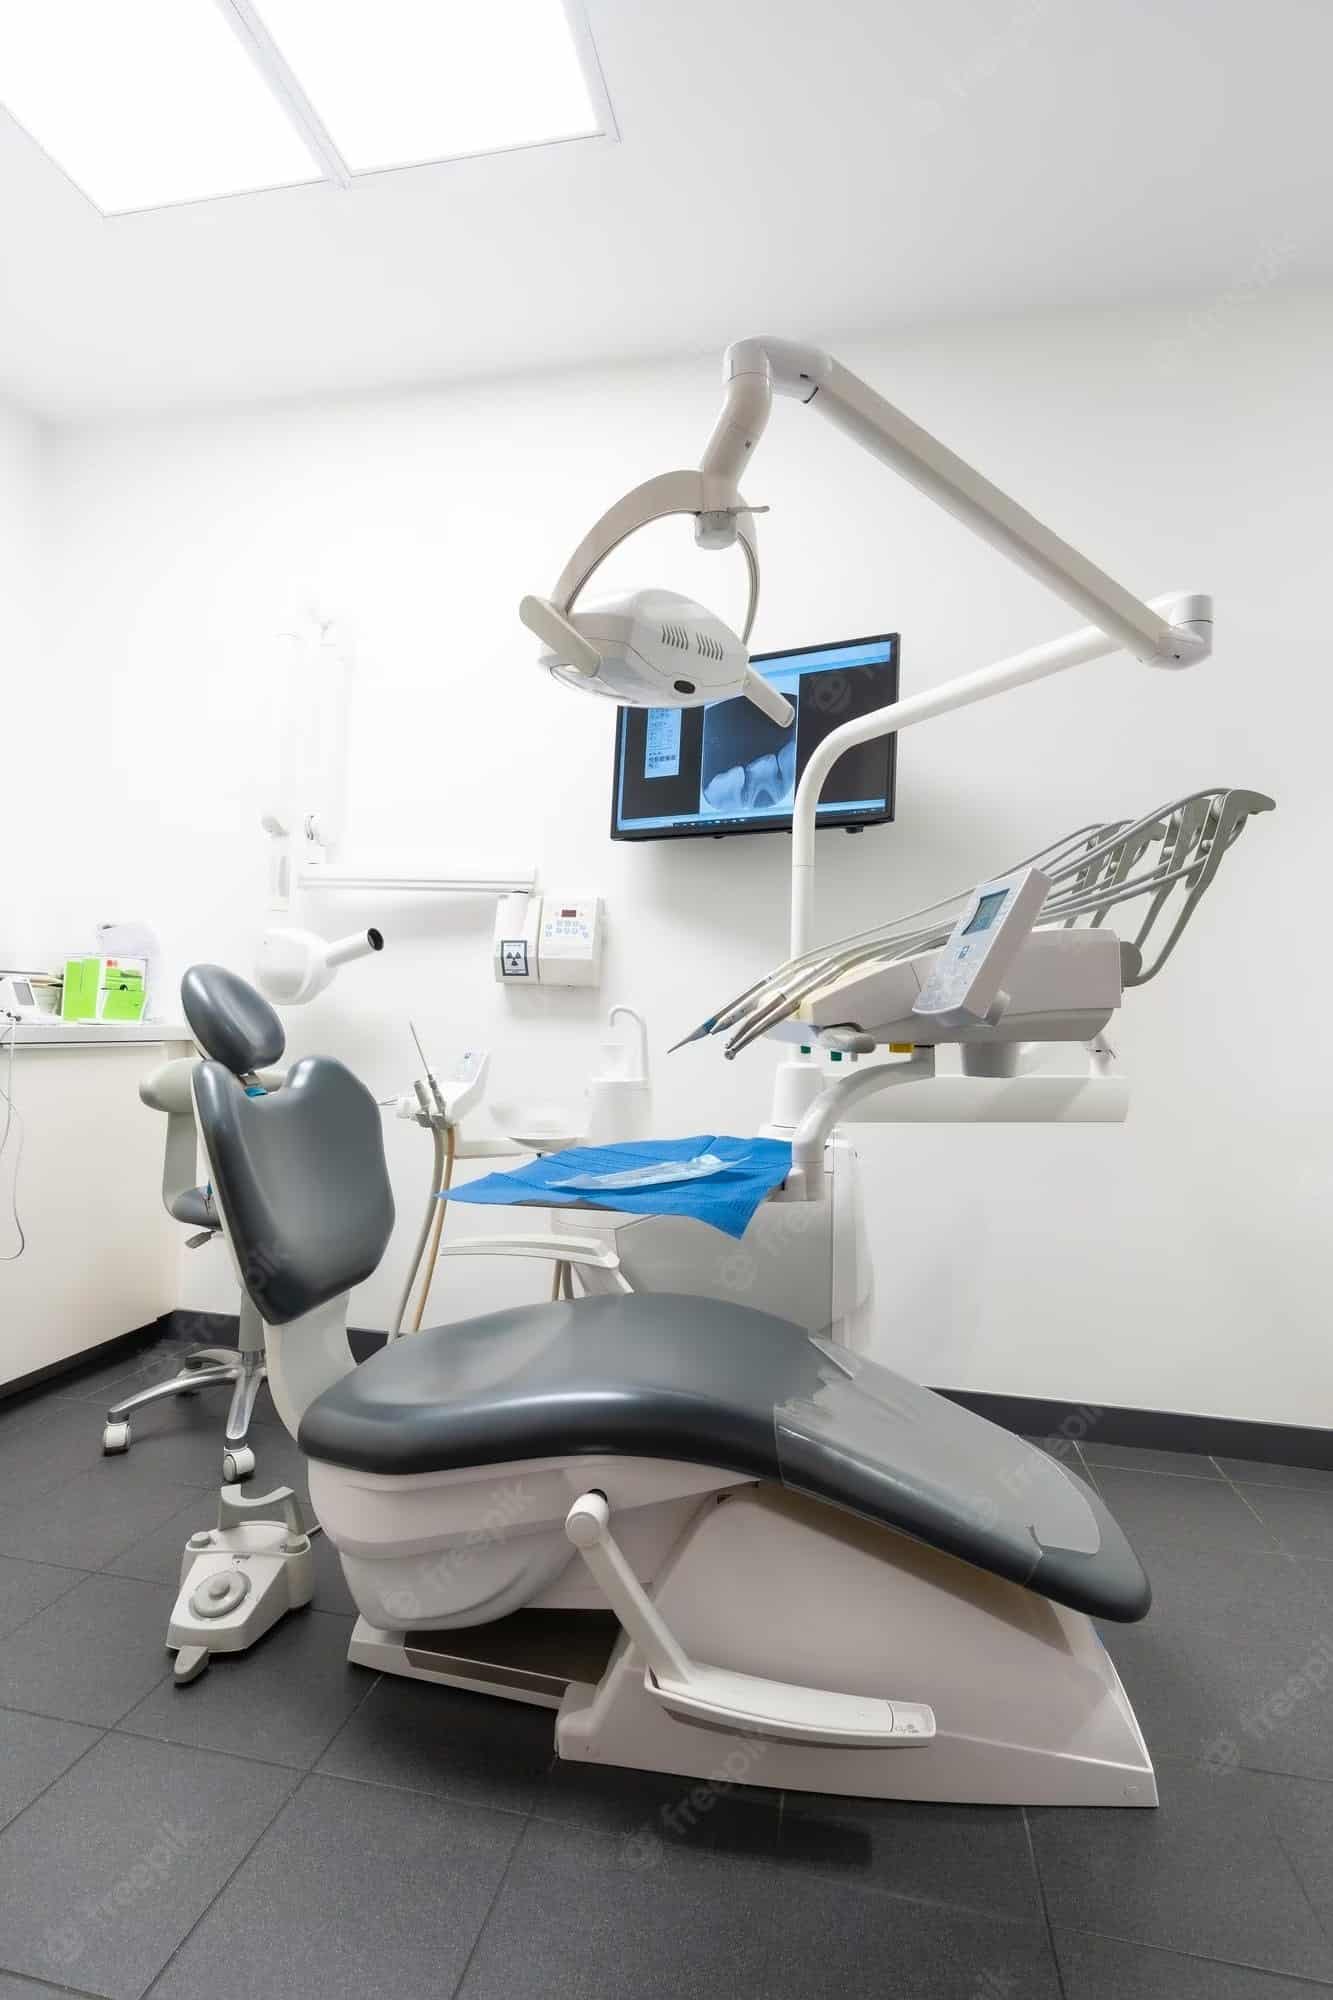 A serene dental clinic environment designed to promote relaxation and comfort during dental visits.